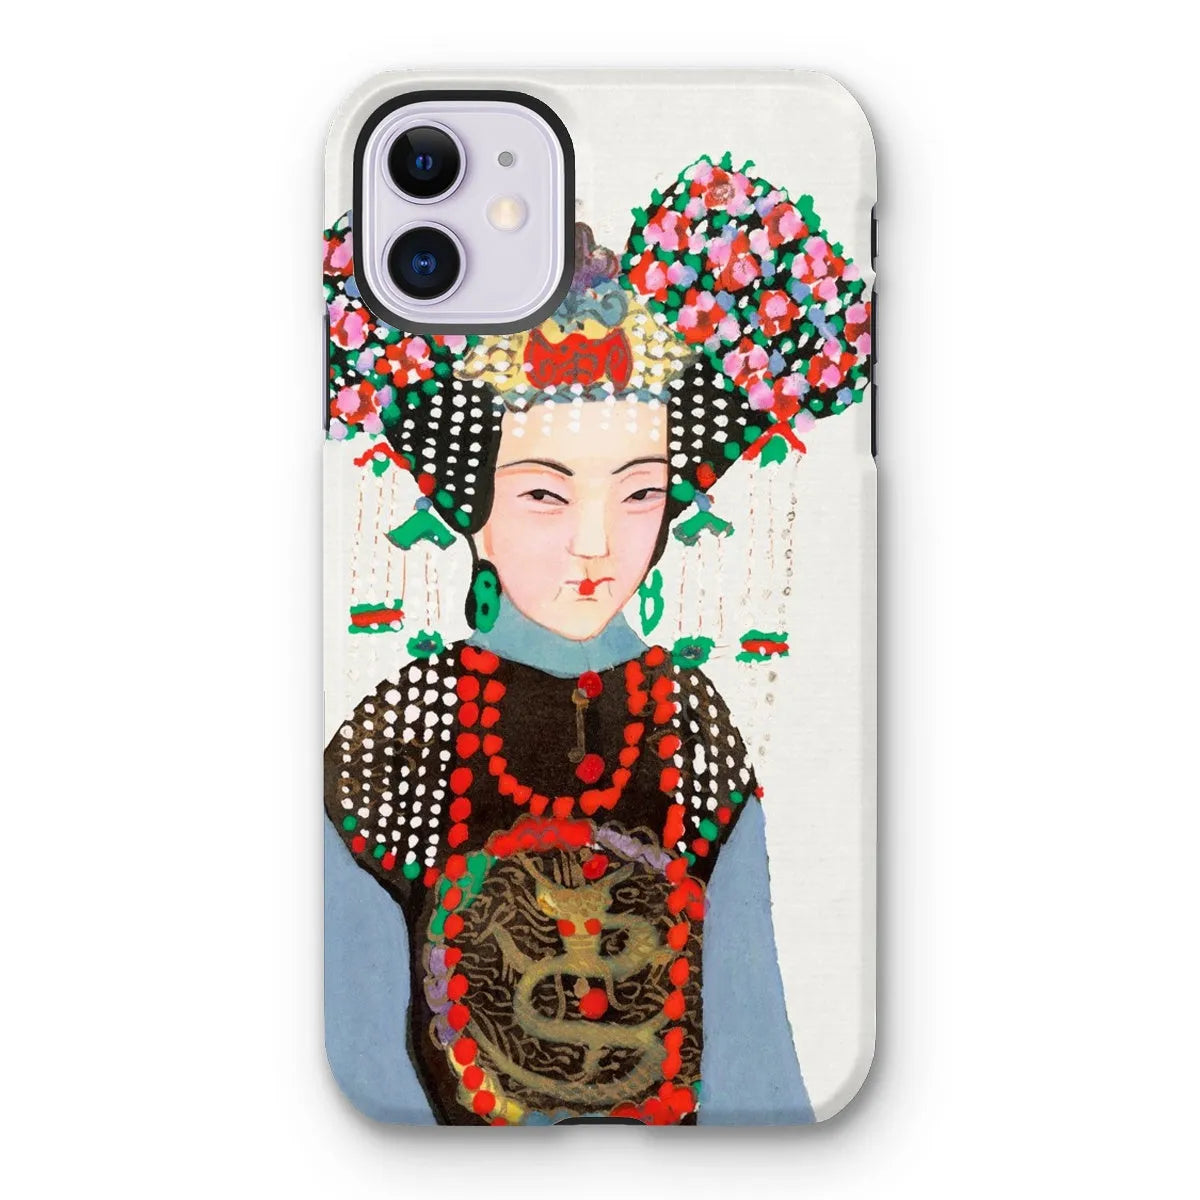 Chinese Empress - Manchu Art Phone Case - Iphone 11 / Matte - Mobile Phone Cases - Aesthetic Art